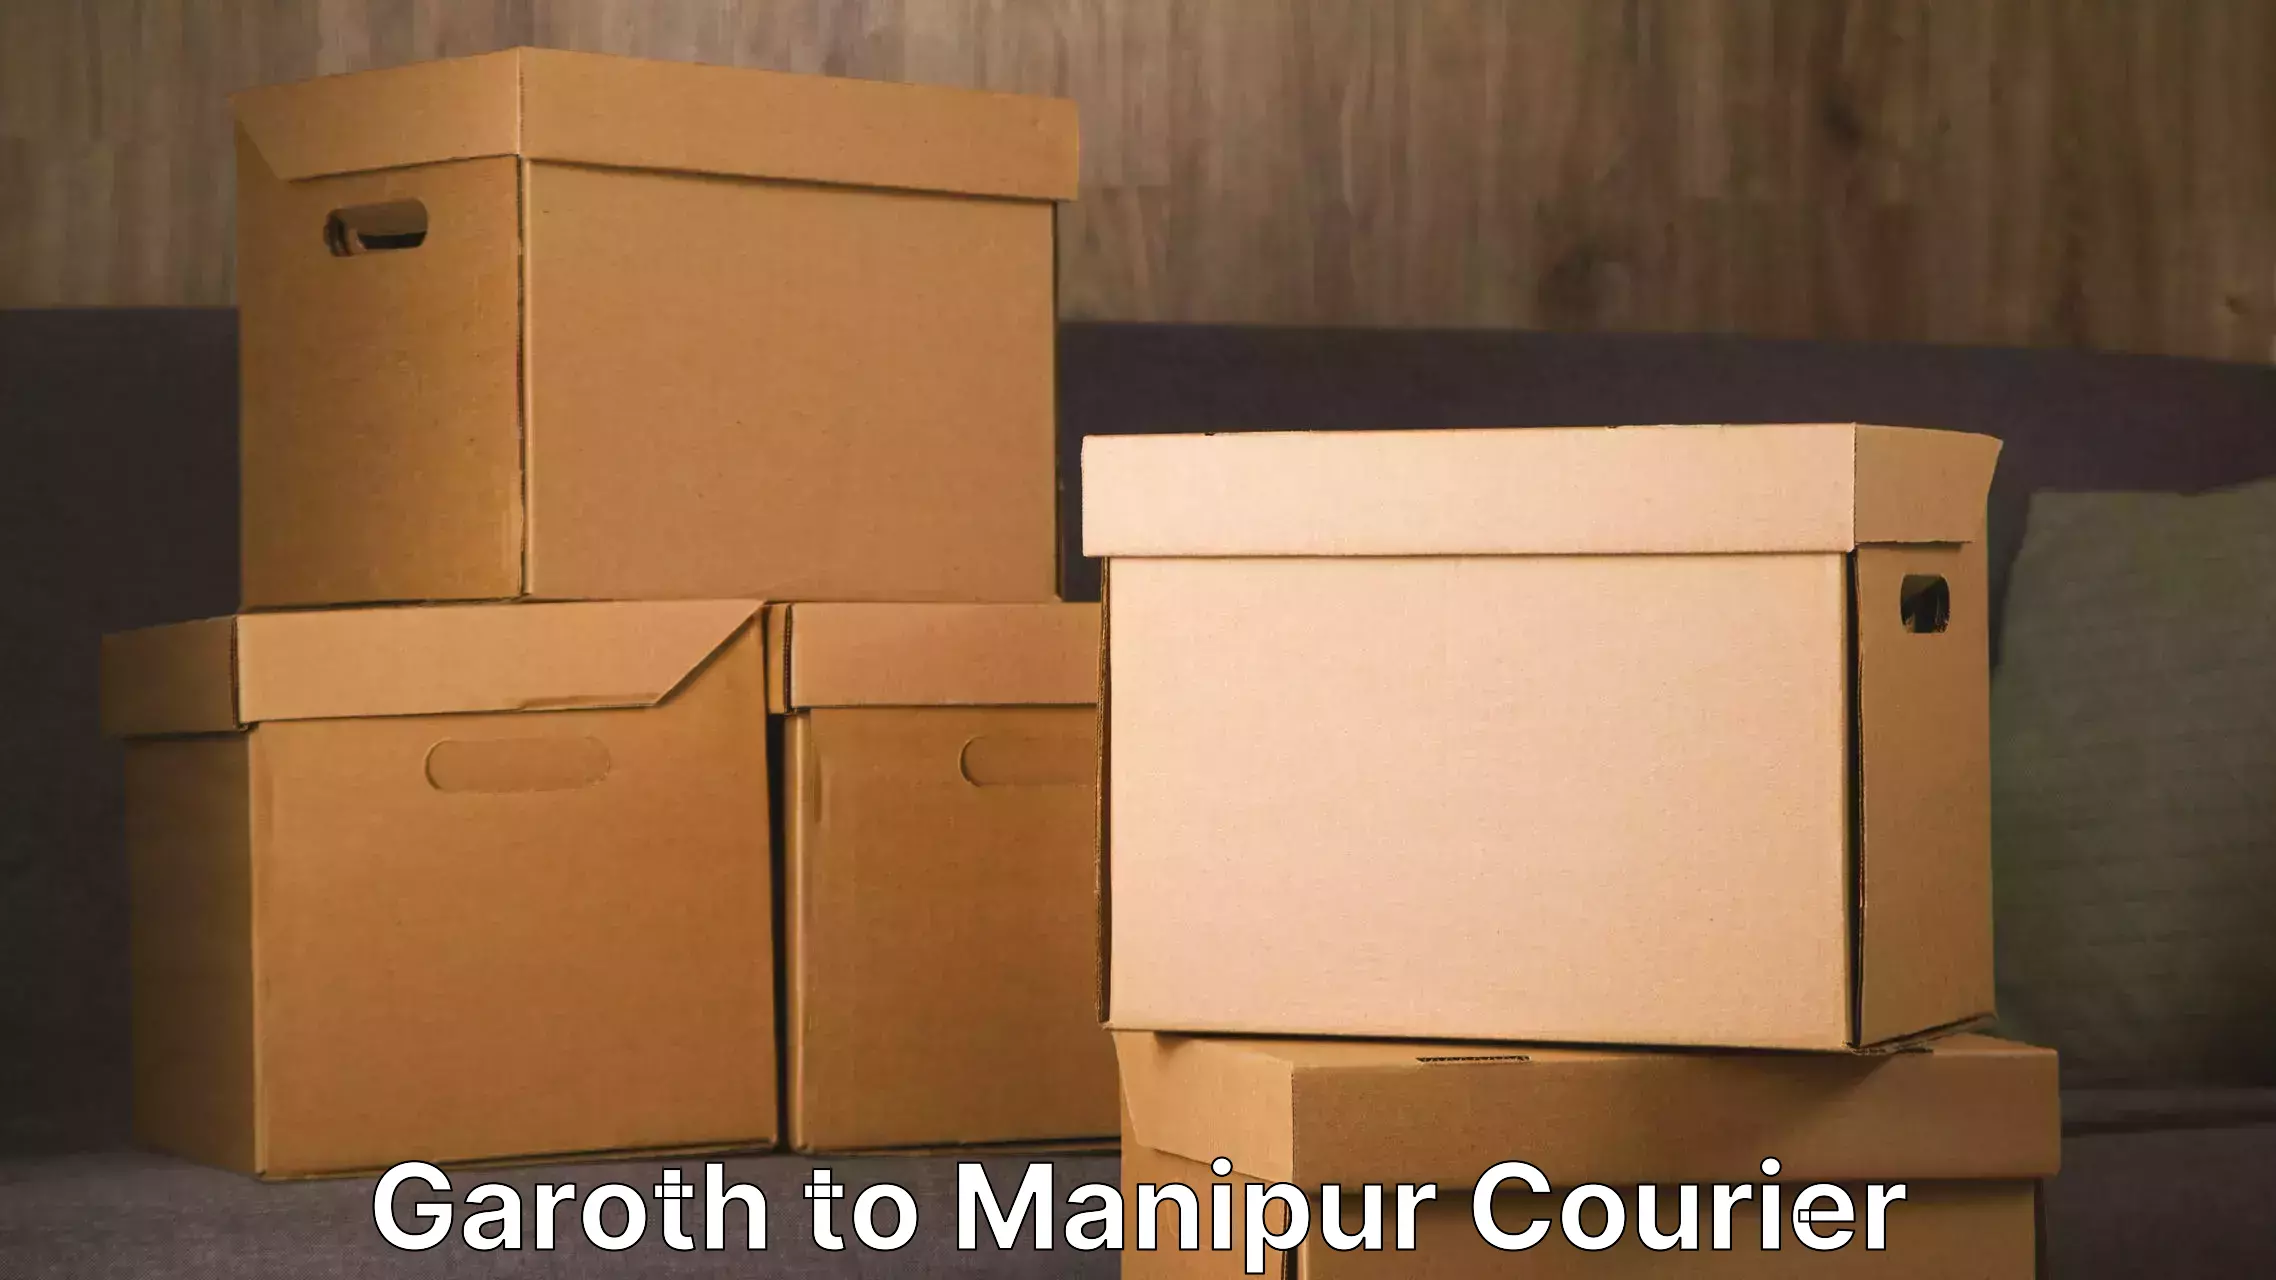 Hassle-free relocation in Garoth to Manipur